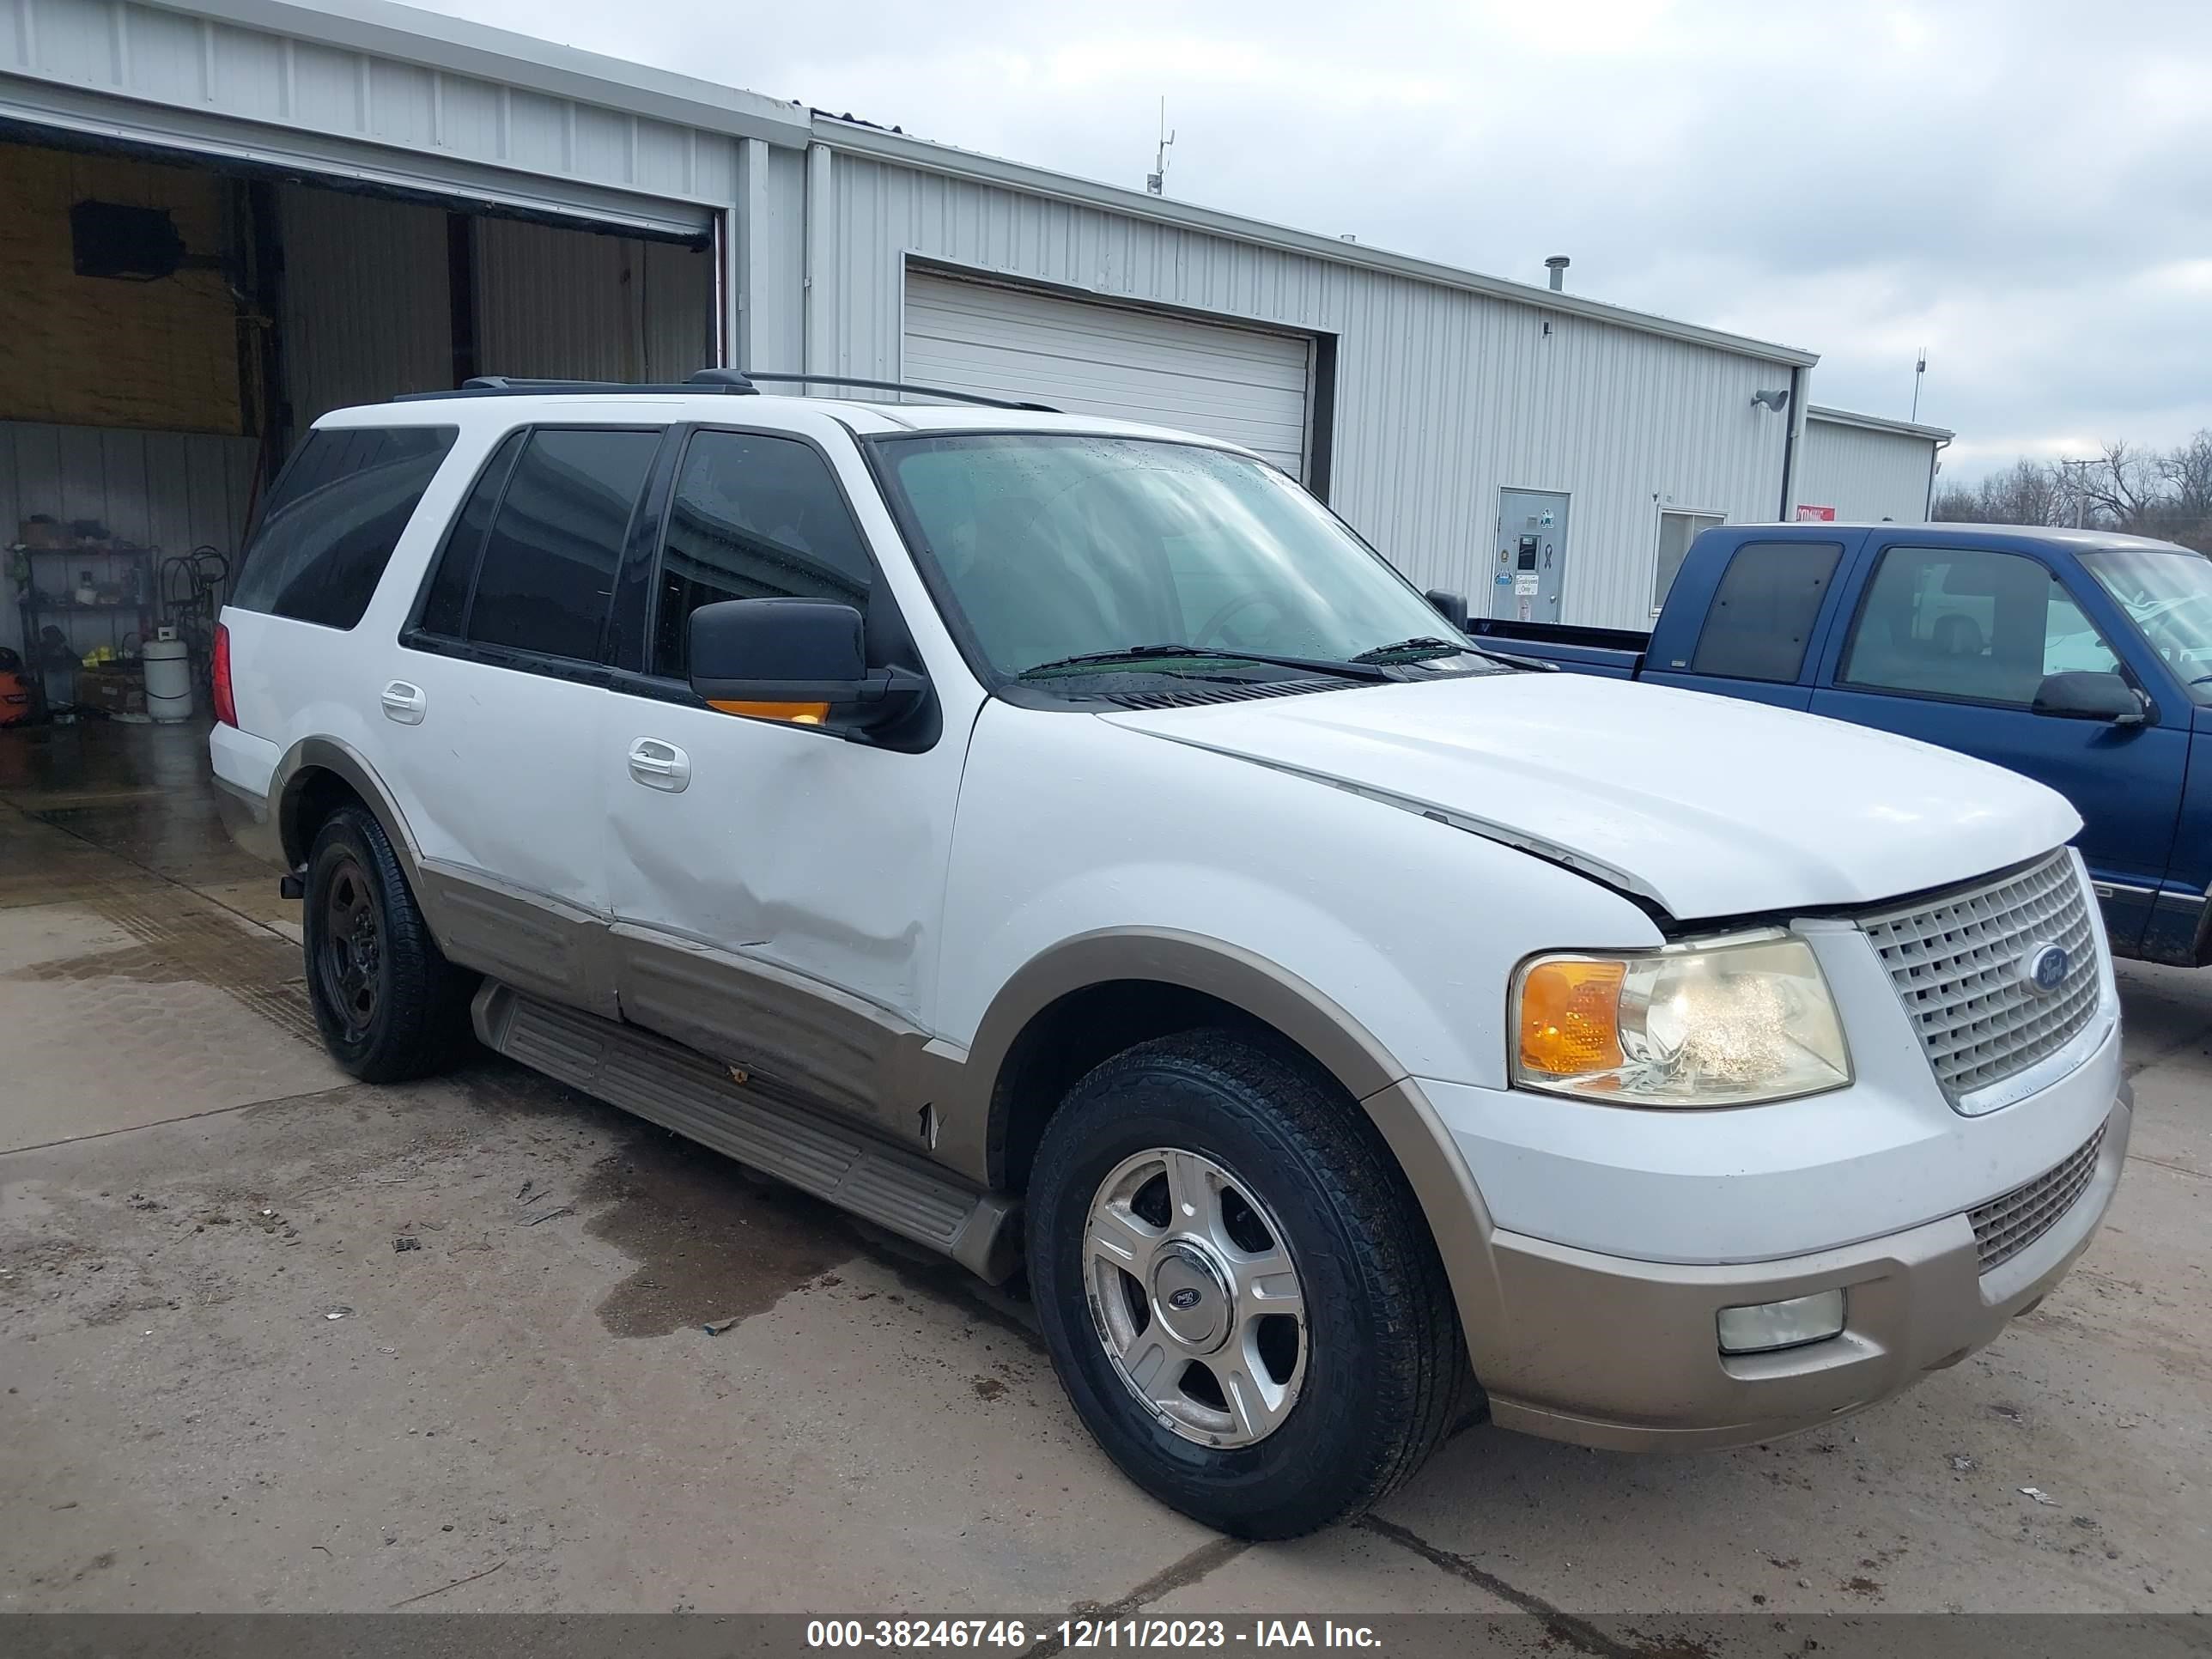 VIN: 1FMEU17W84LA16165 - ford expedition